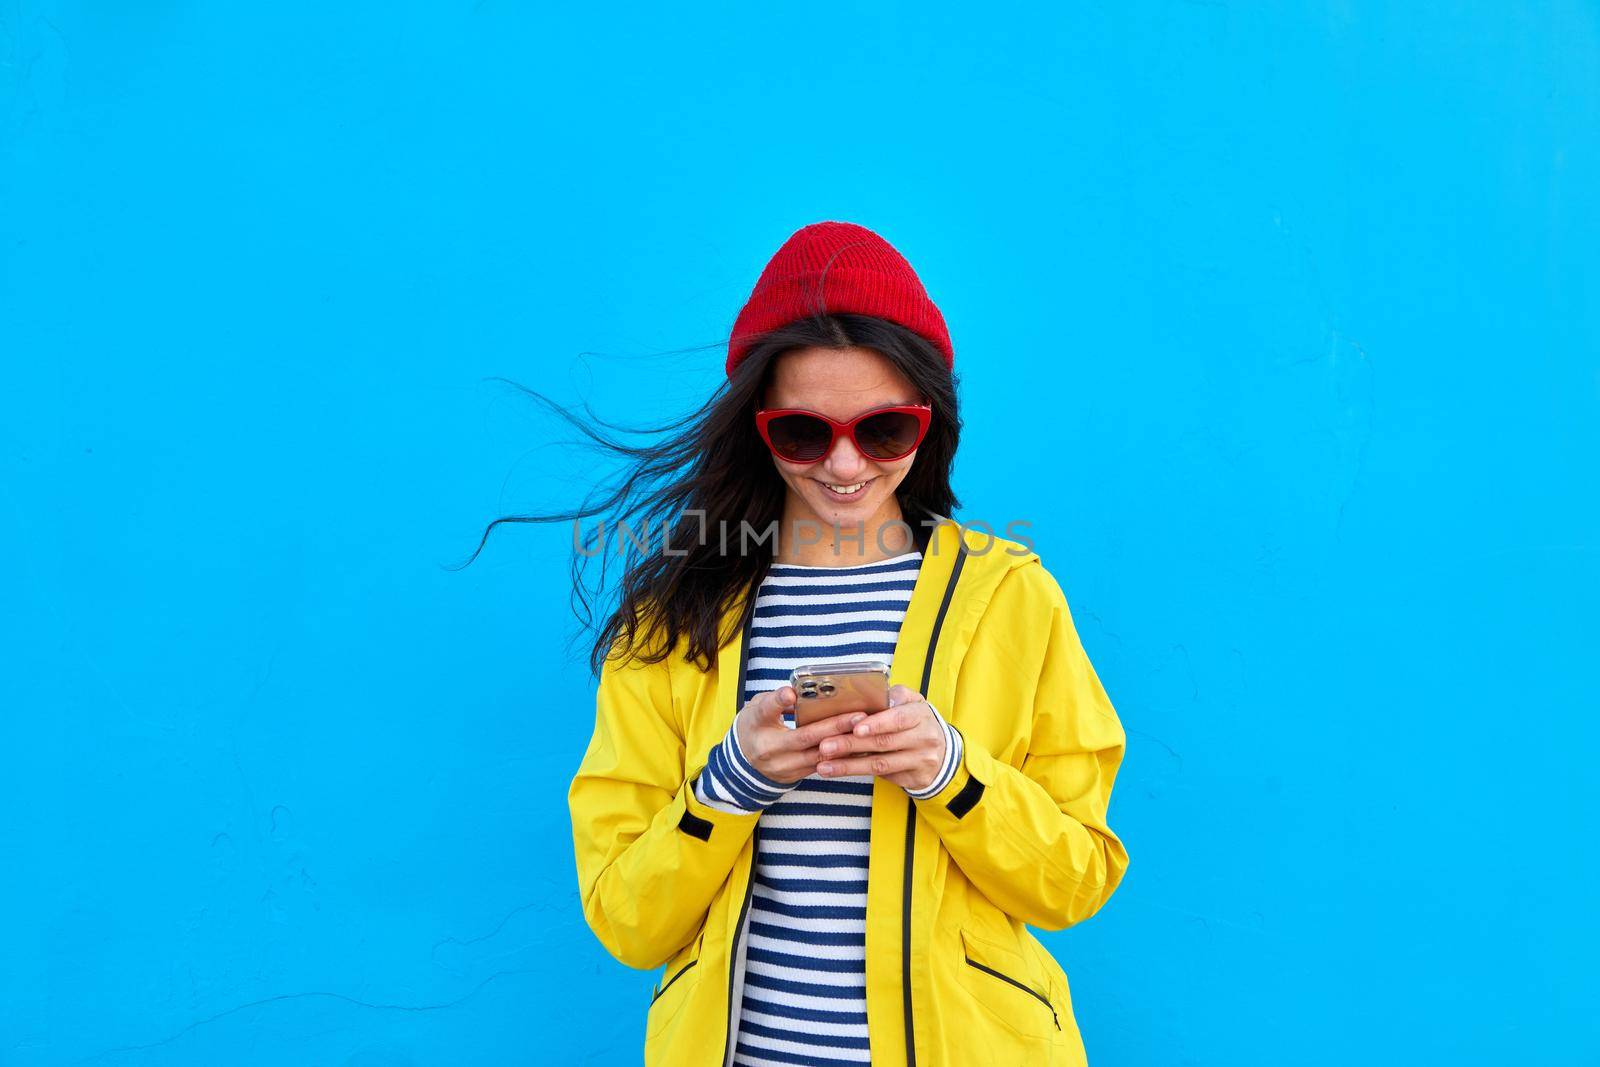 Woman in colorful outfit using smartphone blue background by Demkat